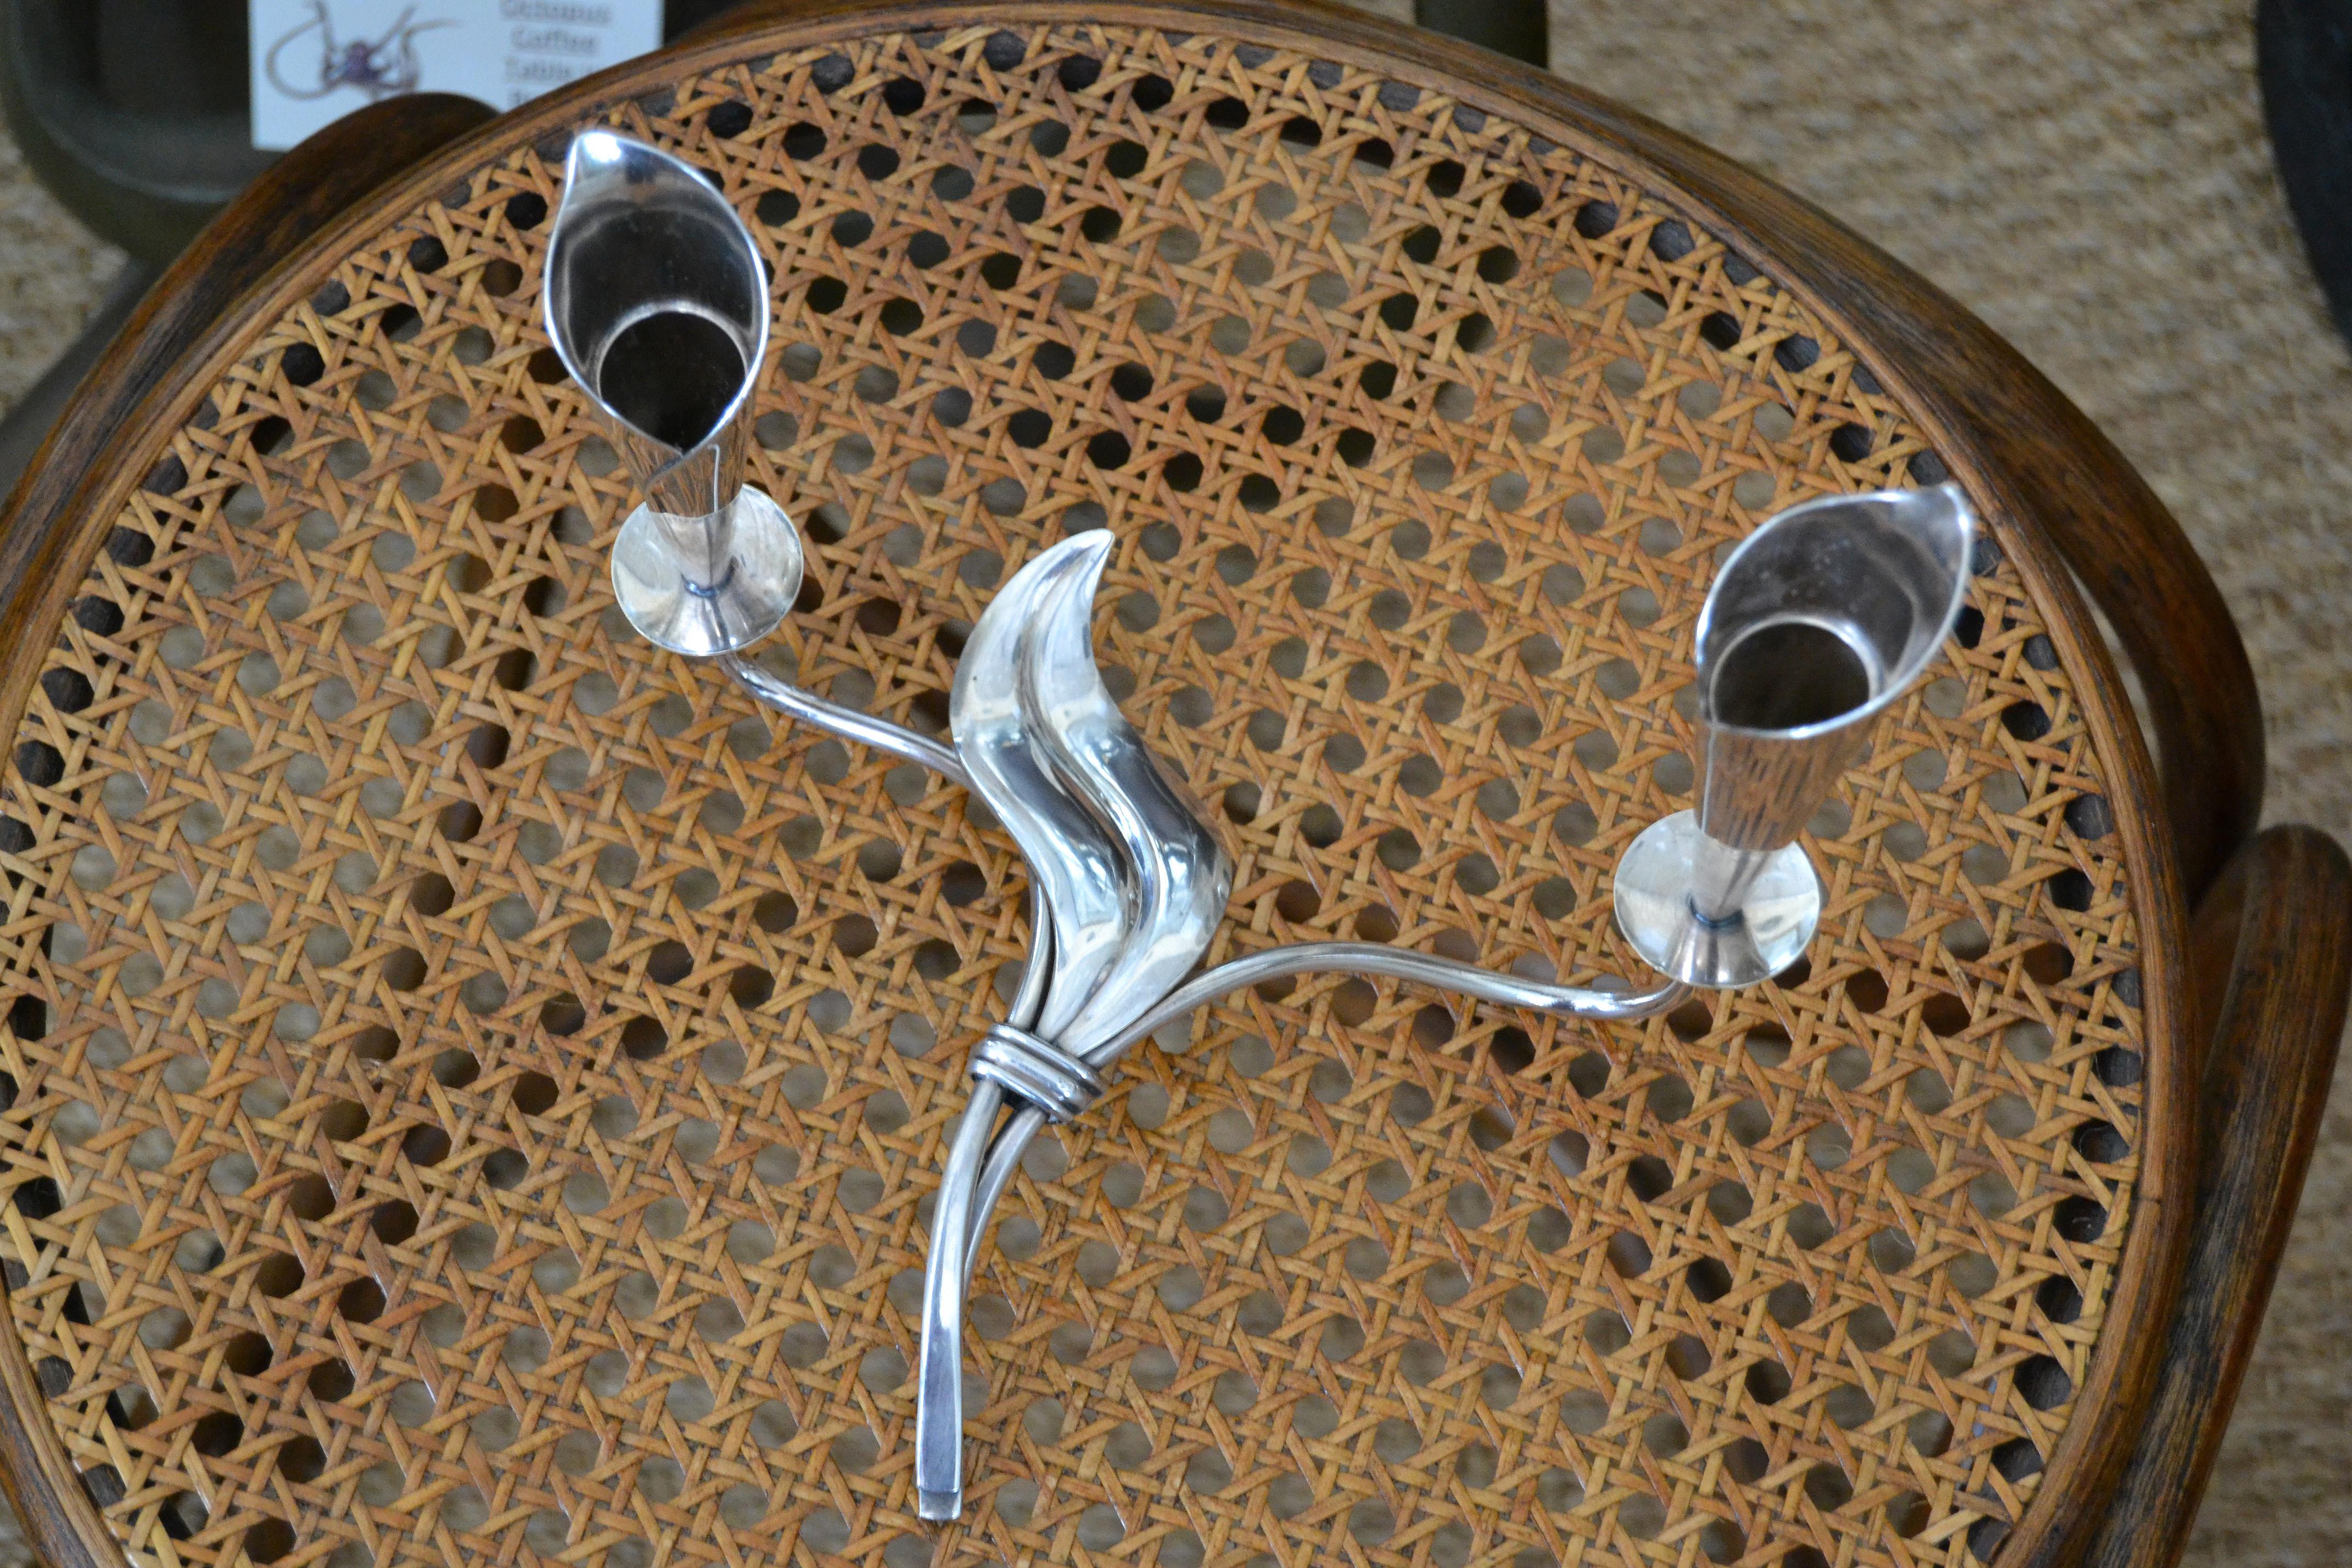 Original Hans Jensen Scandinavian Modern silver plate Calla Lily form double candelabra.
Swimming whale hallmark and 'Danmark' writing on the stem.
It is in excellent condition and would make a lovely centerpiece for any Mid-Century Modern setting.